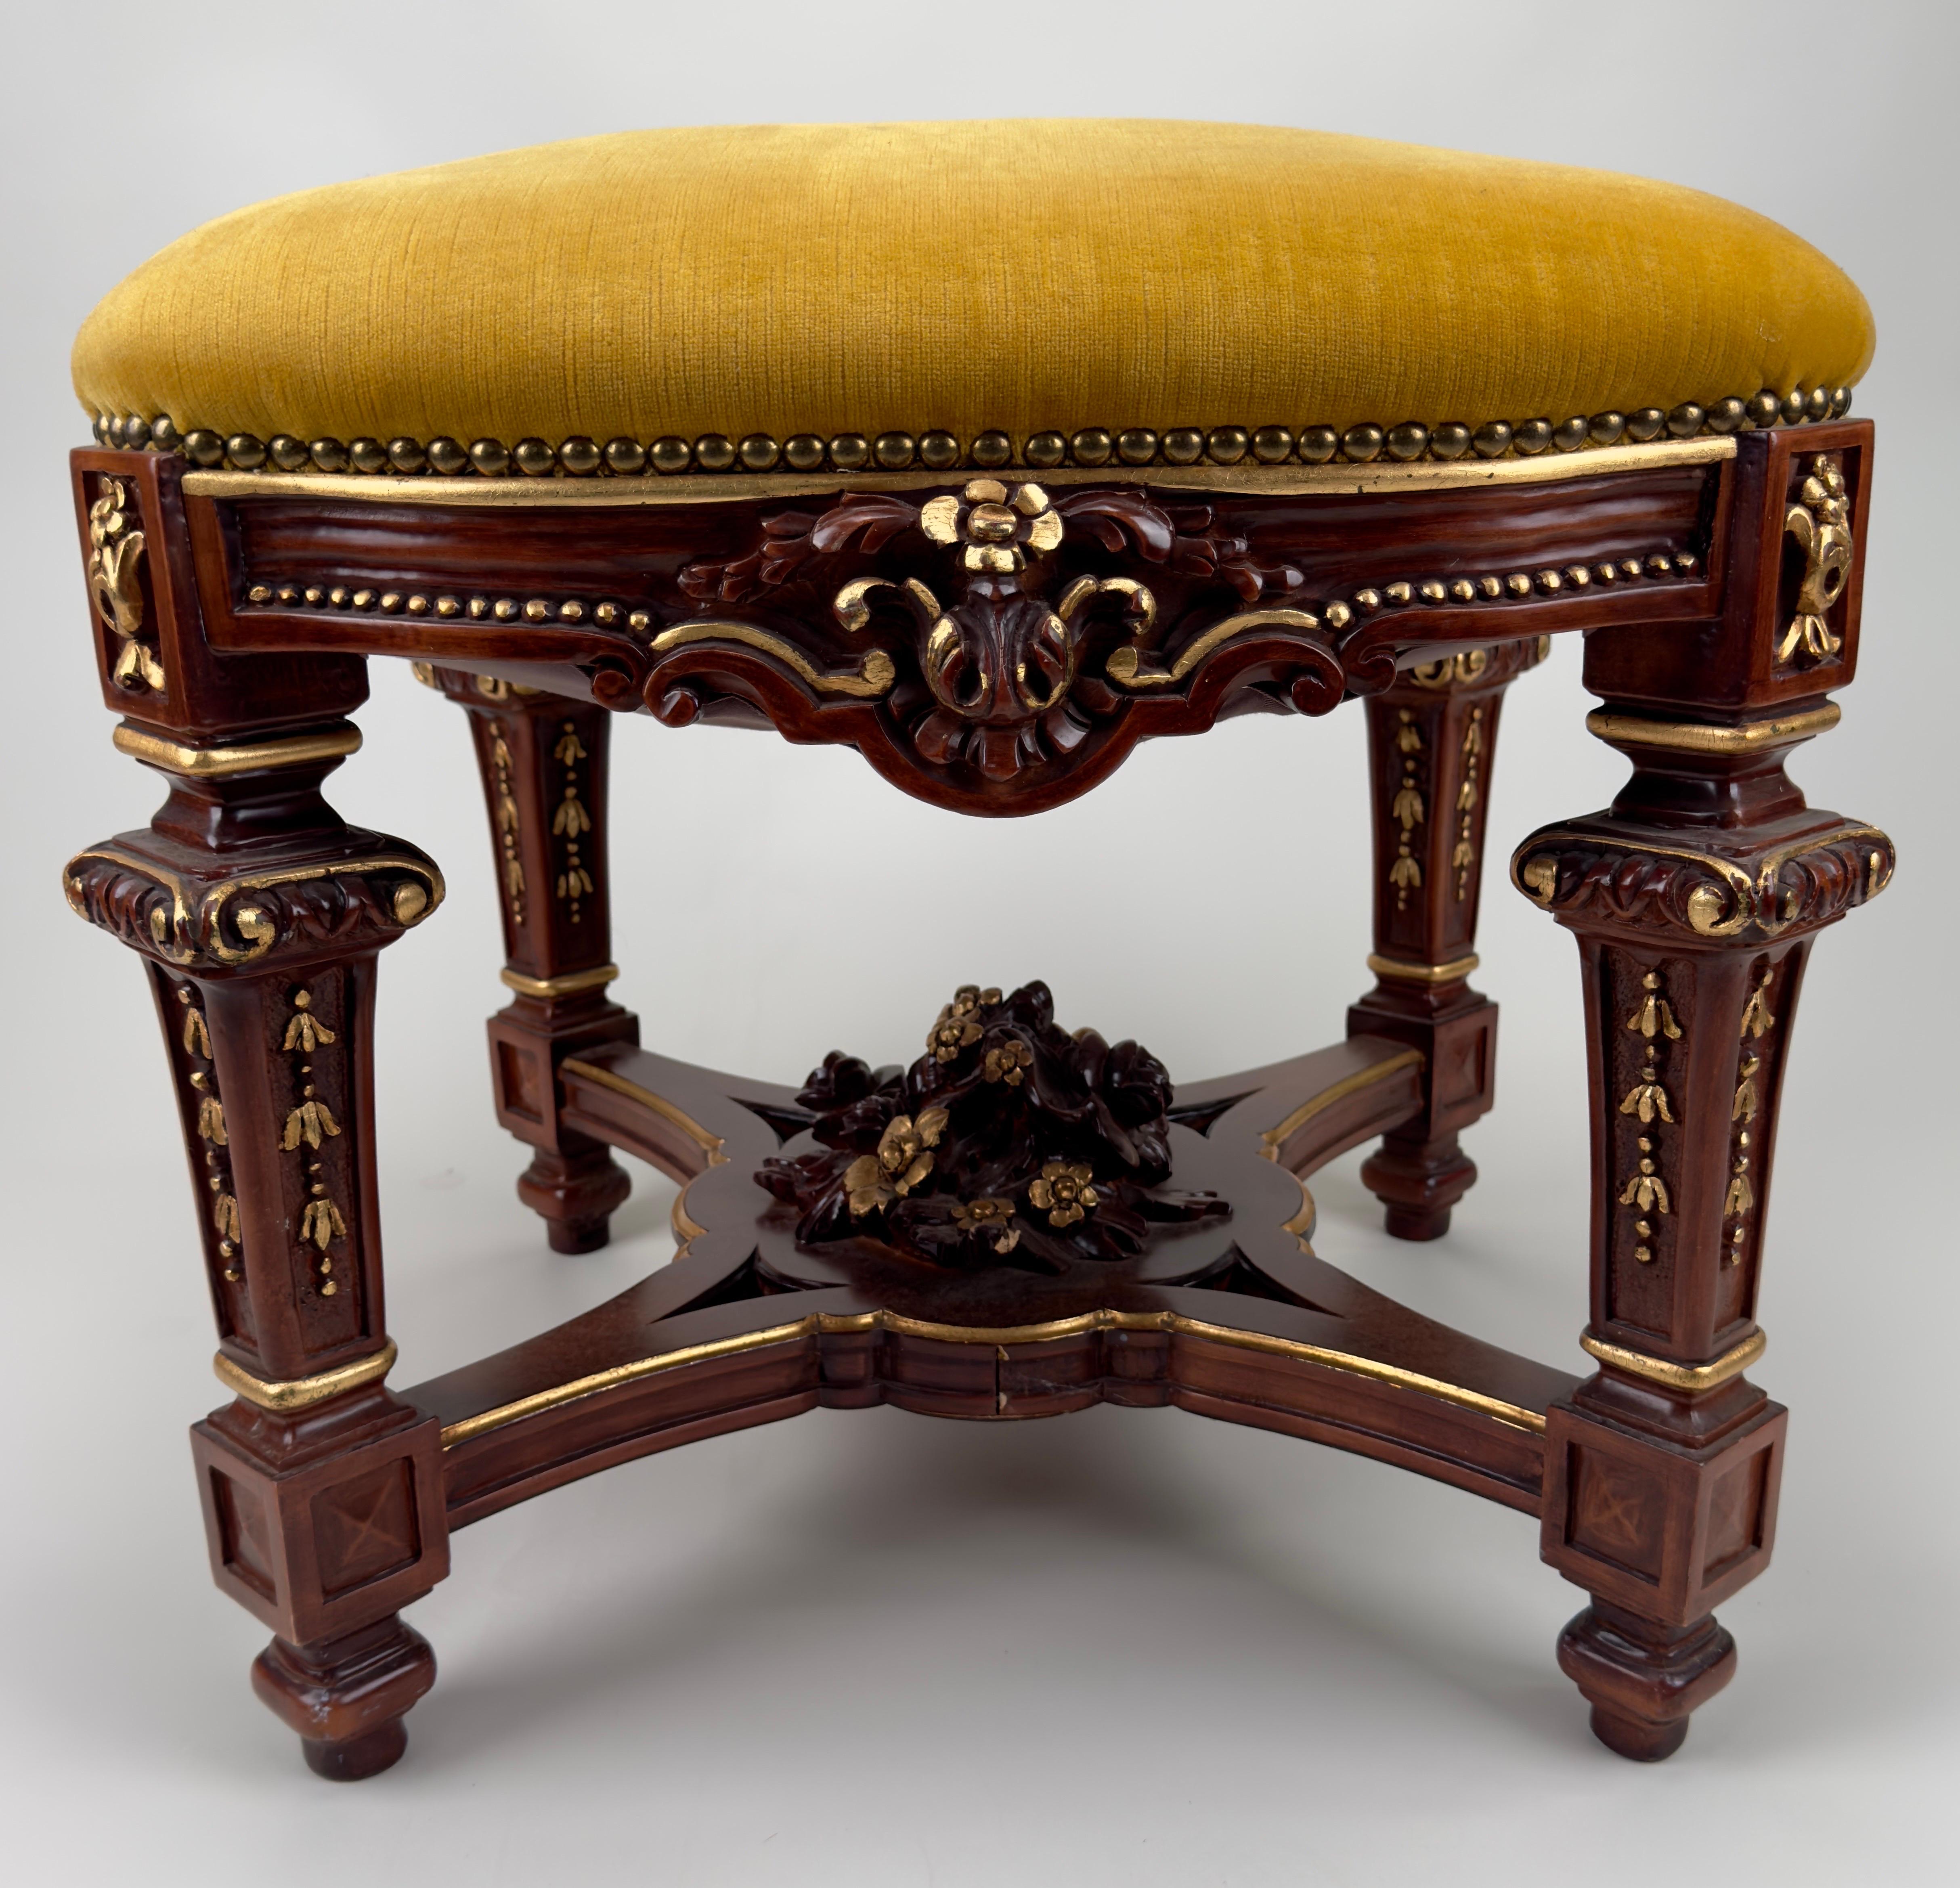 An Italian Baroque Style bench or ottoman , carved meticulously from the finest Mahogany in a rectangular shape, the base stands as a testament to the artisan's skill, adorned with intricate motifs of acanthus leaves and blossoming florals, each